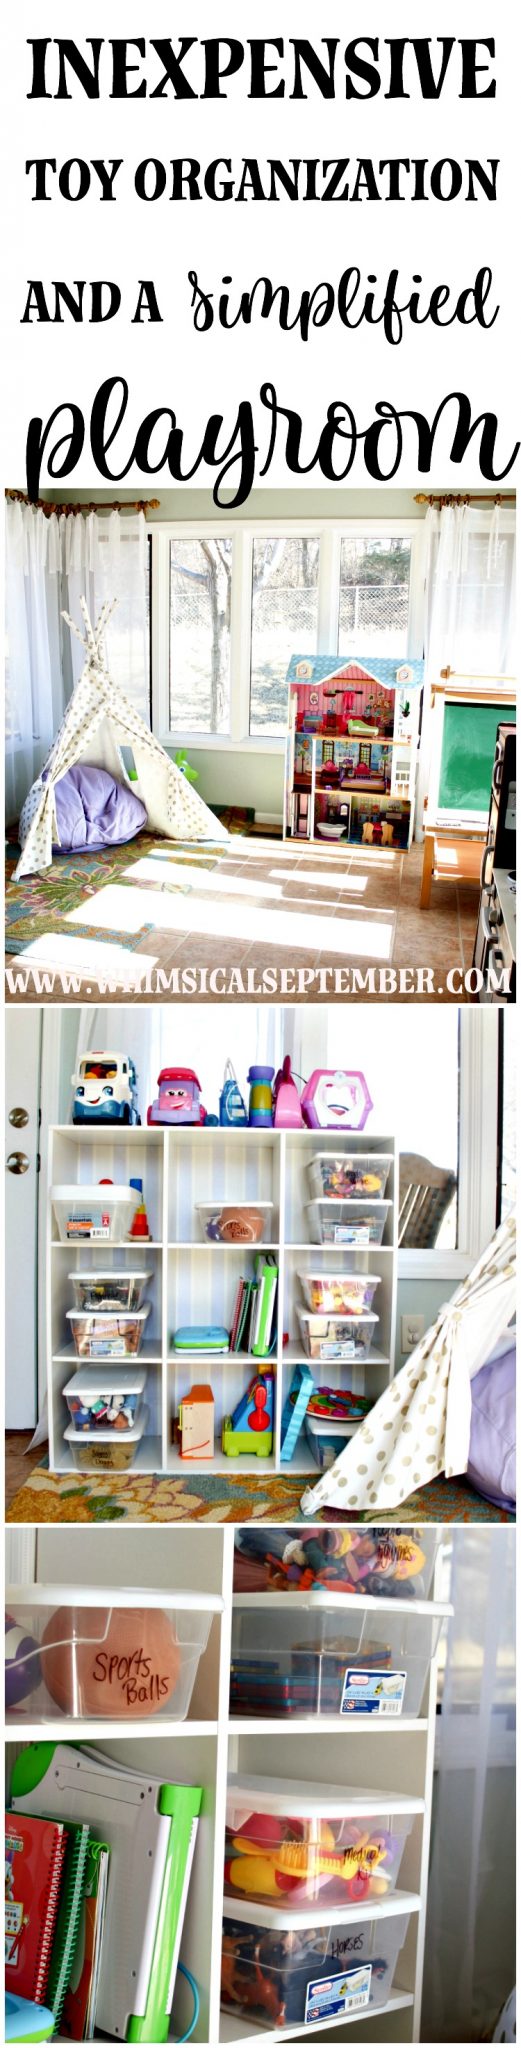 Toy Organization and a Simplified Playroom - Whimsical September